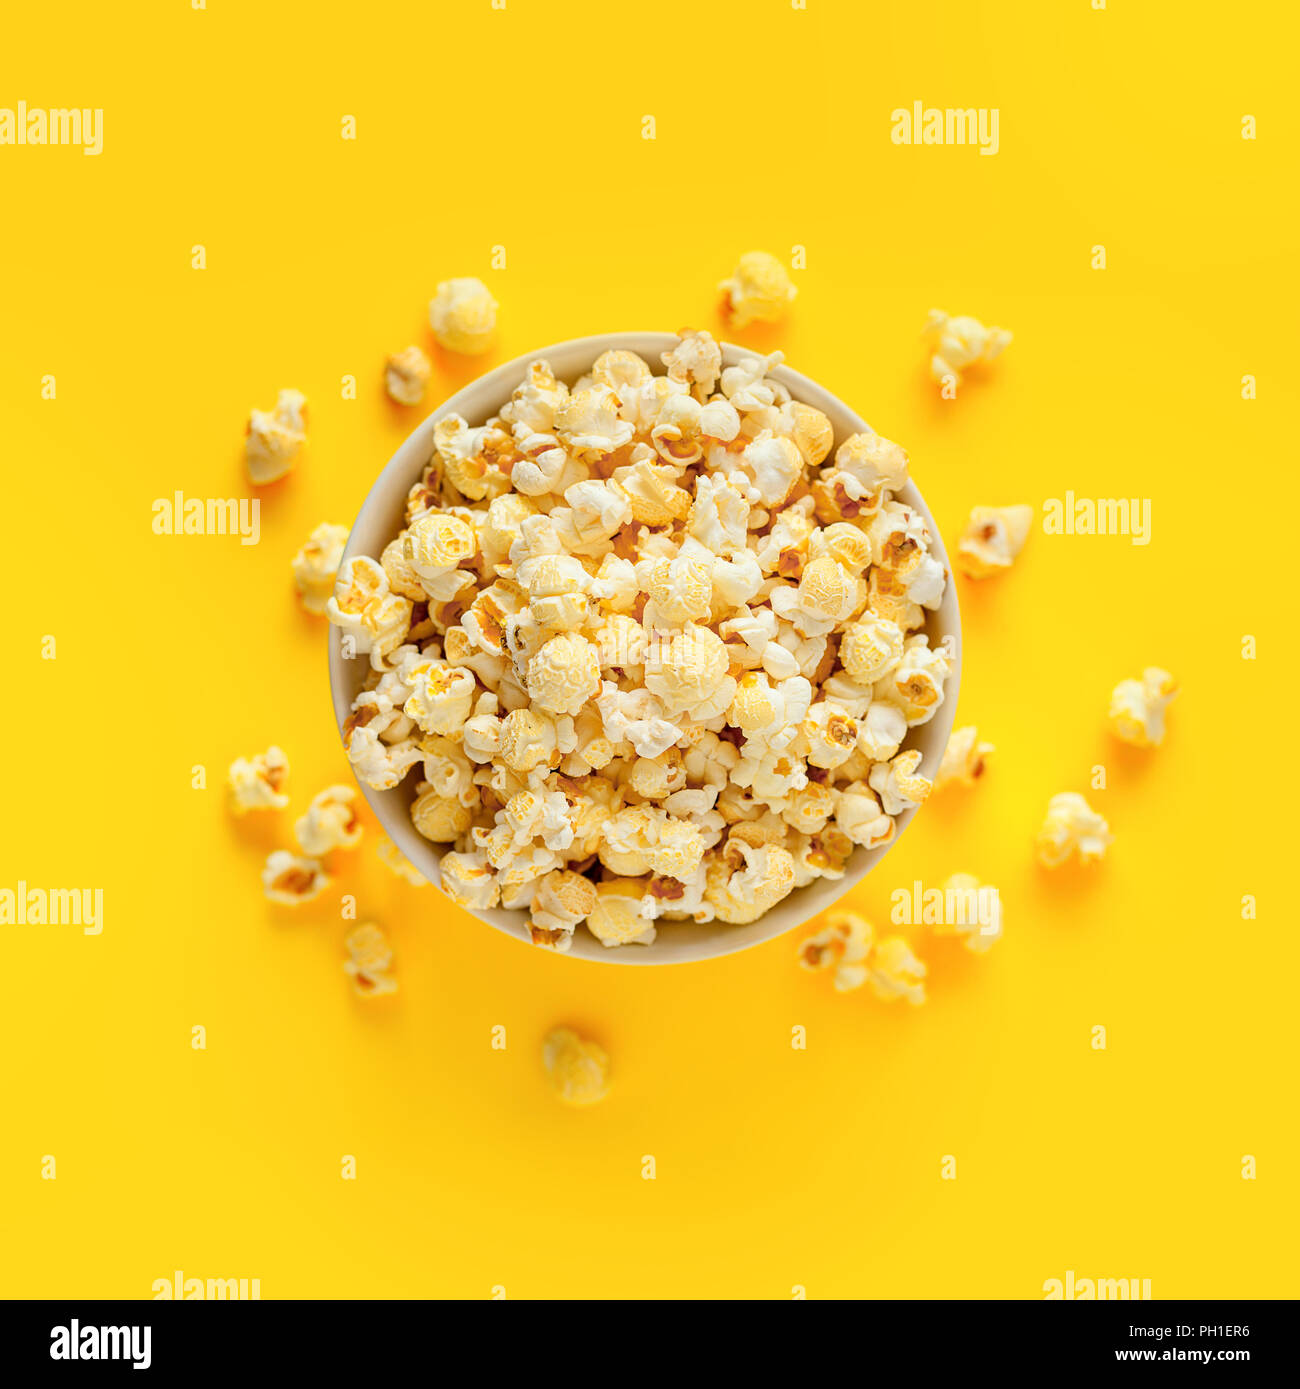 Download Popcorn In Paper Box On A Yellow Background Top View Stock Photo Alamy Yellowimages Mockups